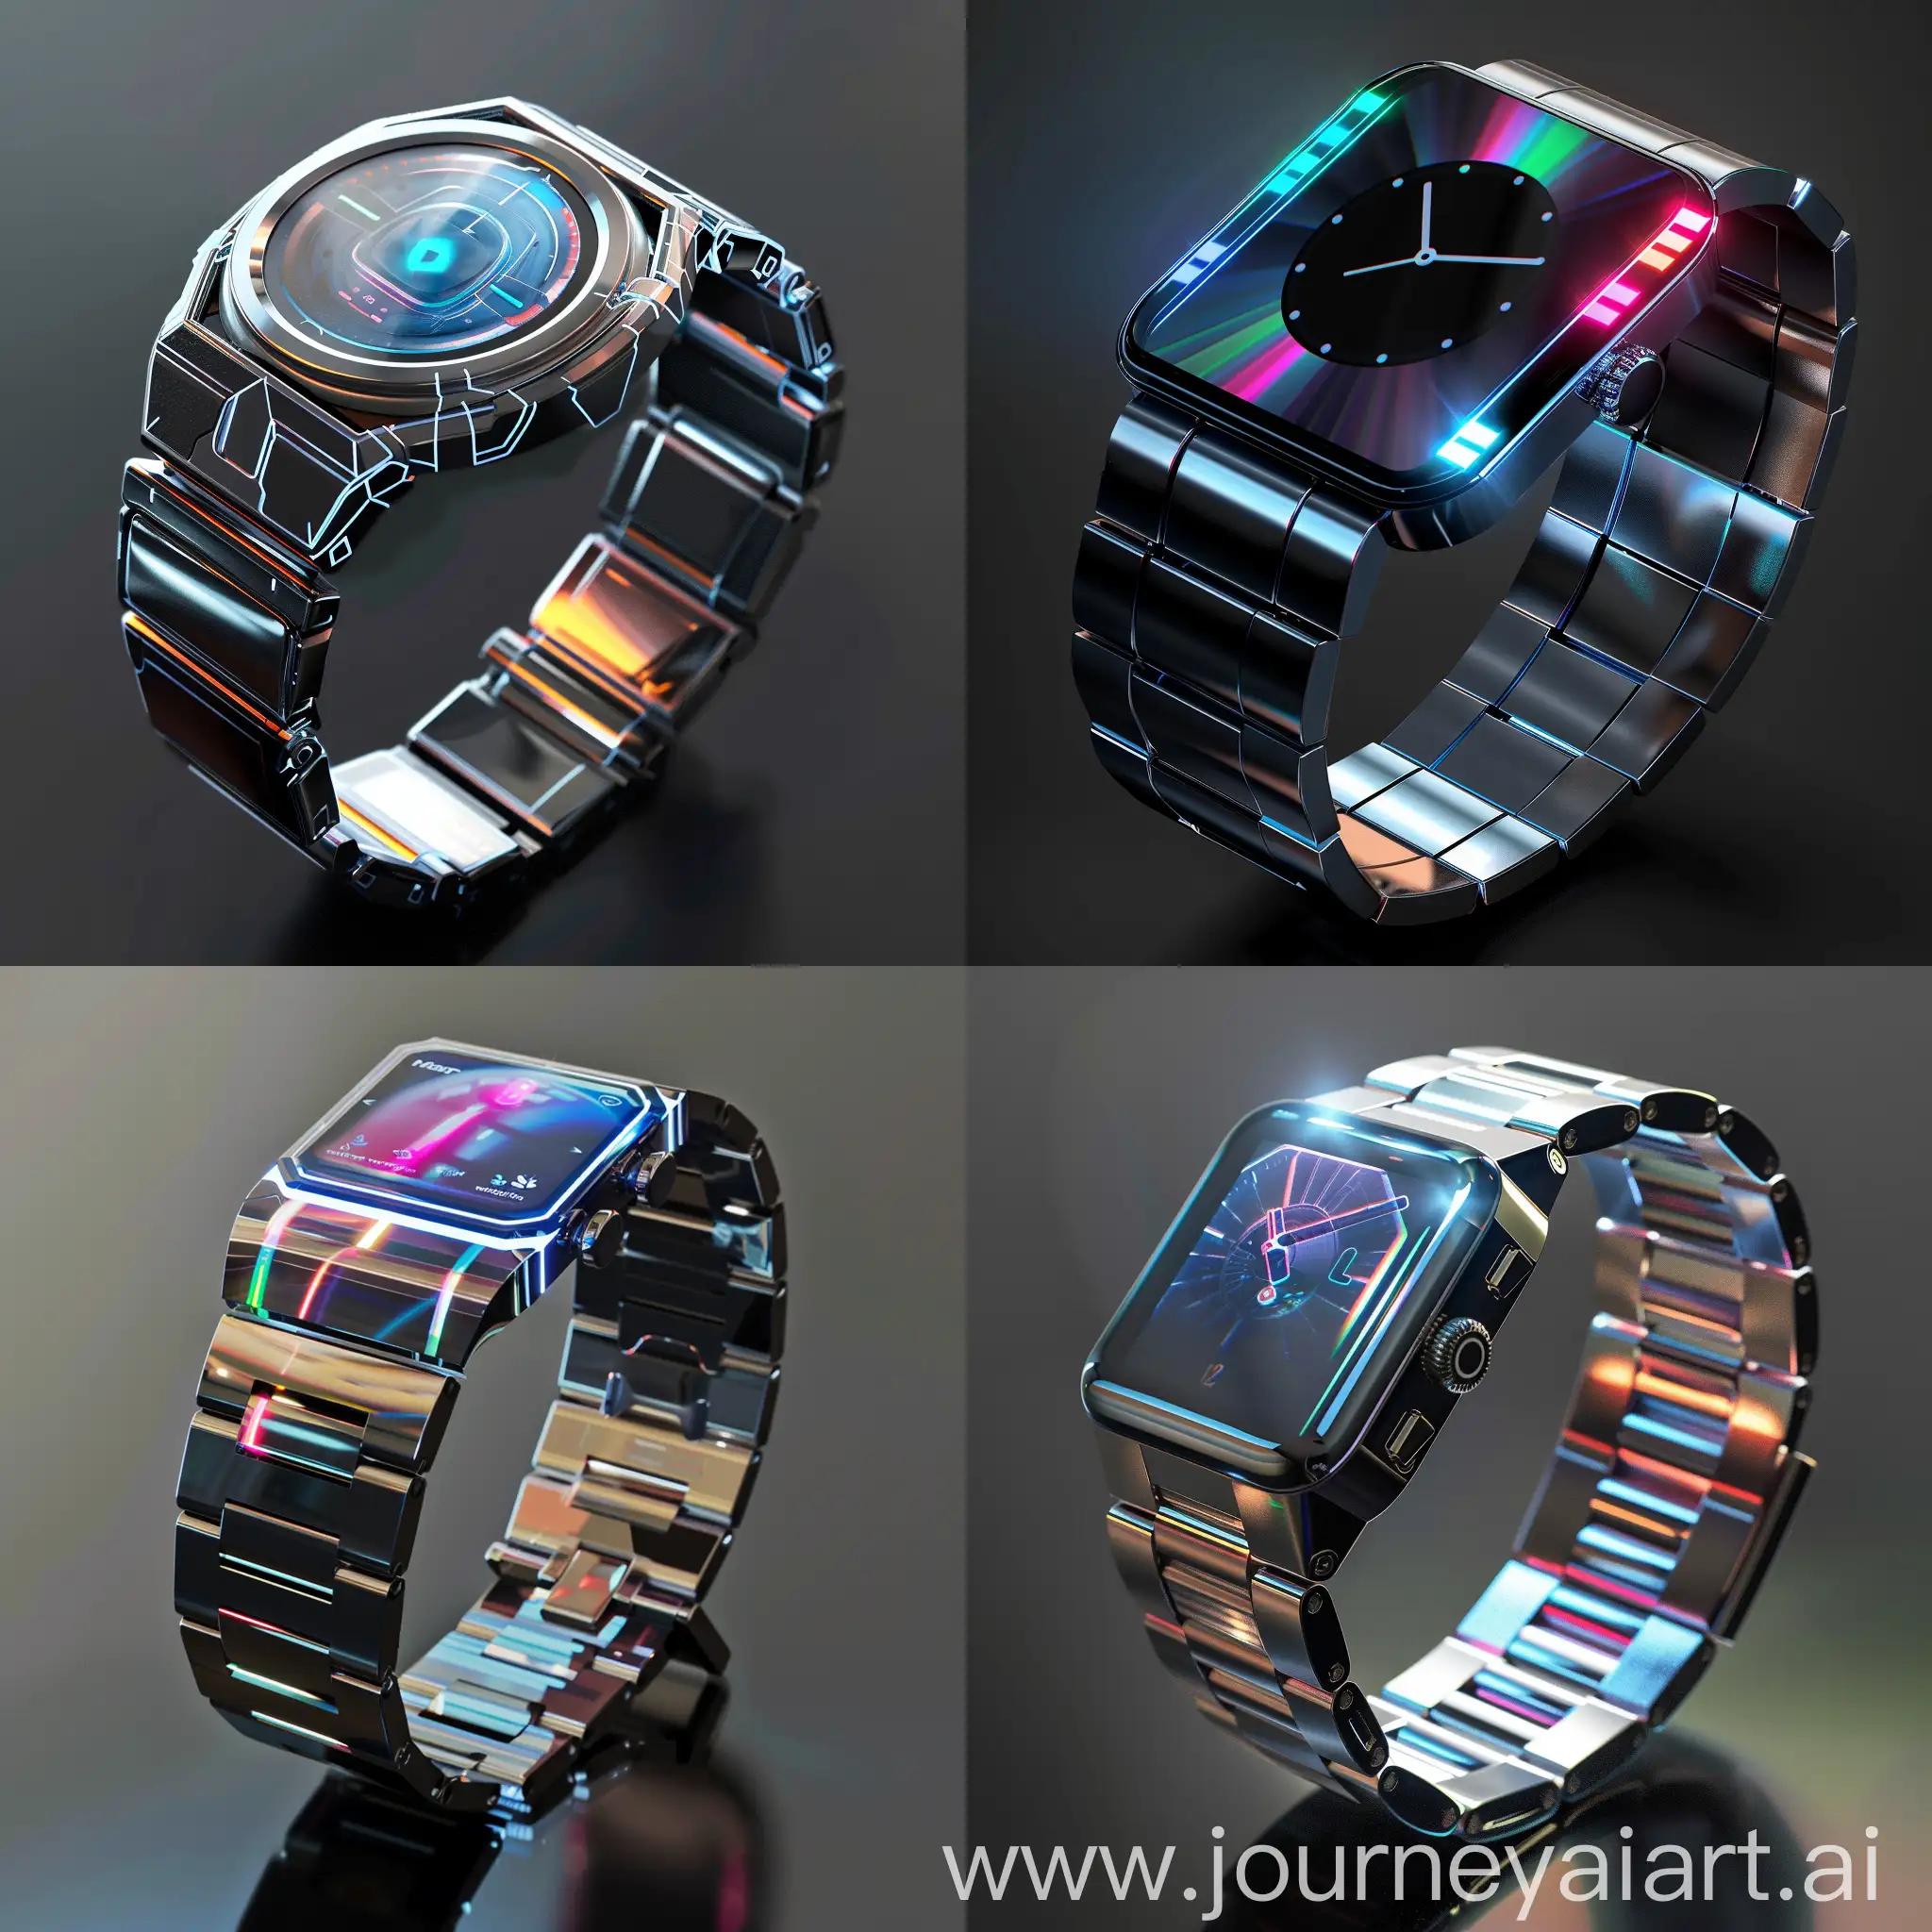 futuristic smartwatch with a holographic display, sleek metallic finish, and customizable bands